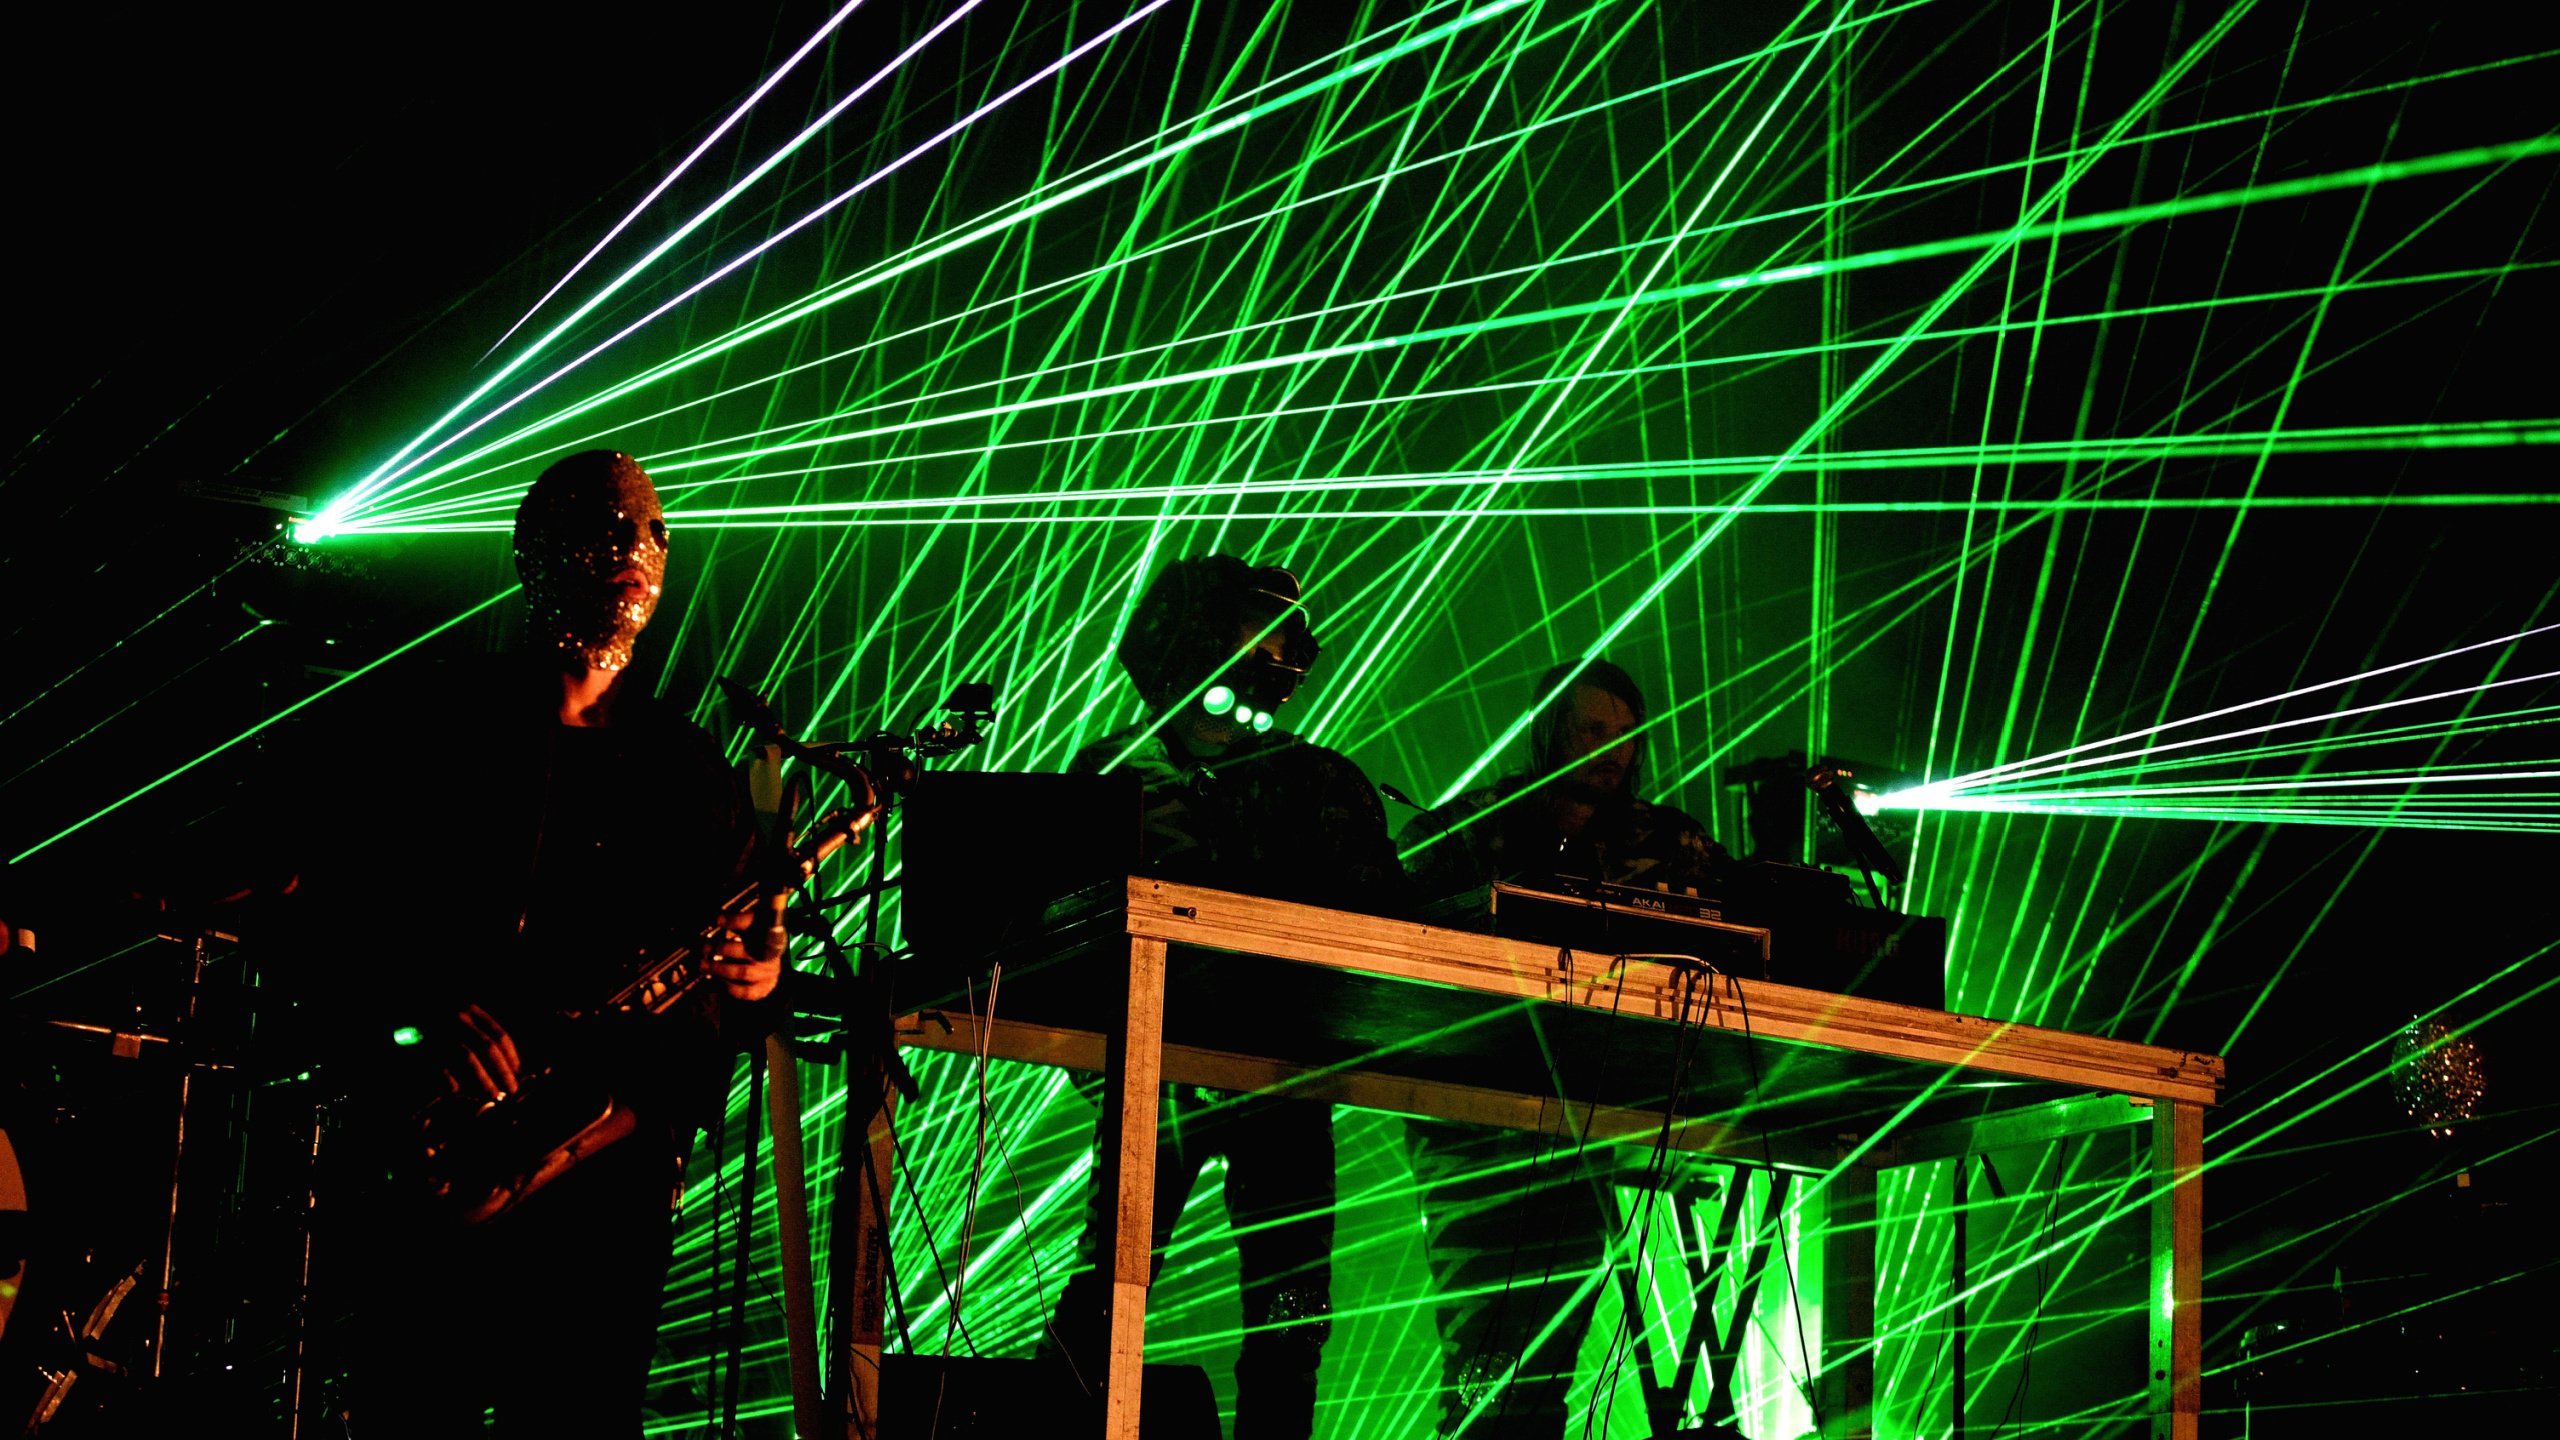 Röyksopp performing live with Robyn at Sonar festival in 2014. Photo: Christian Bertrand / Shutterstock.com.